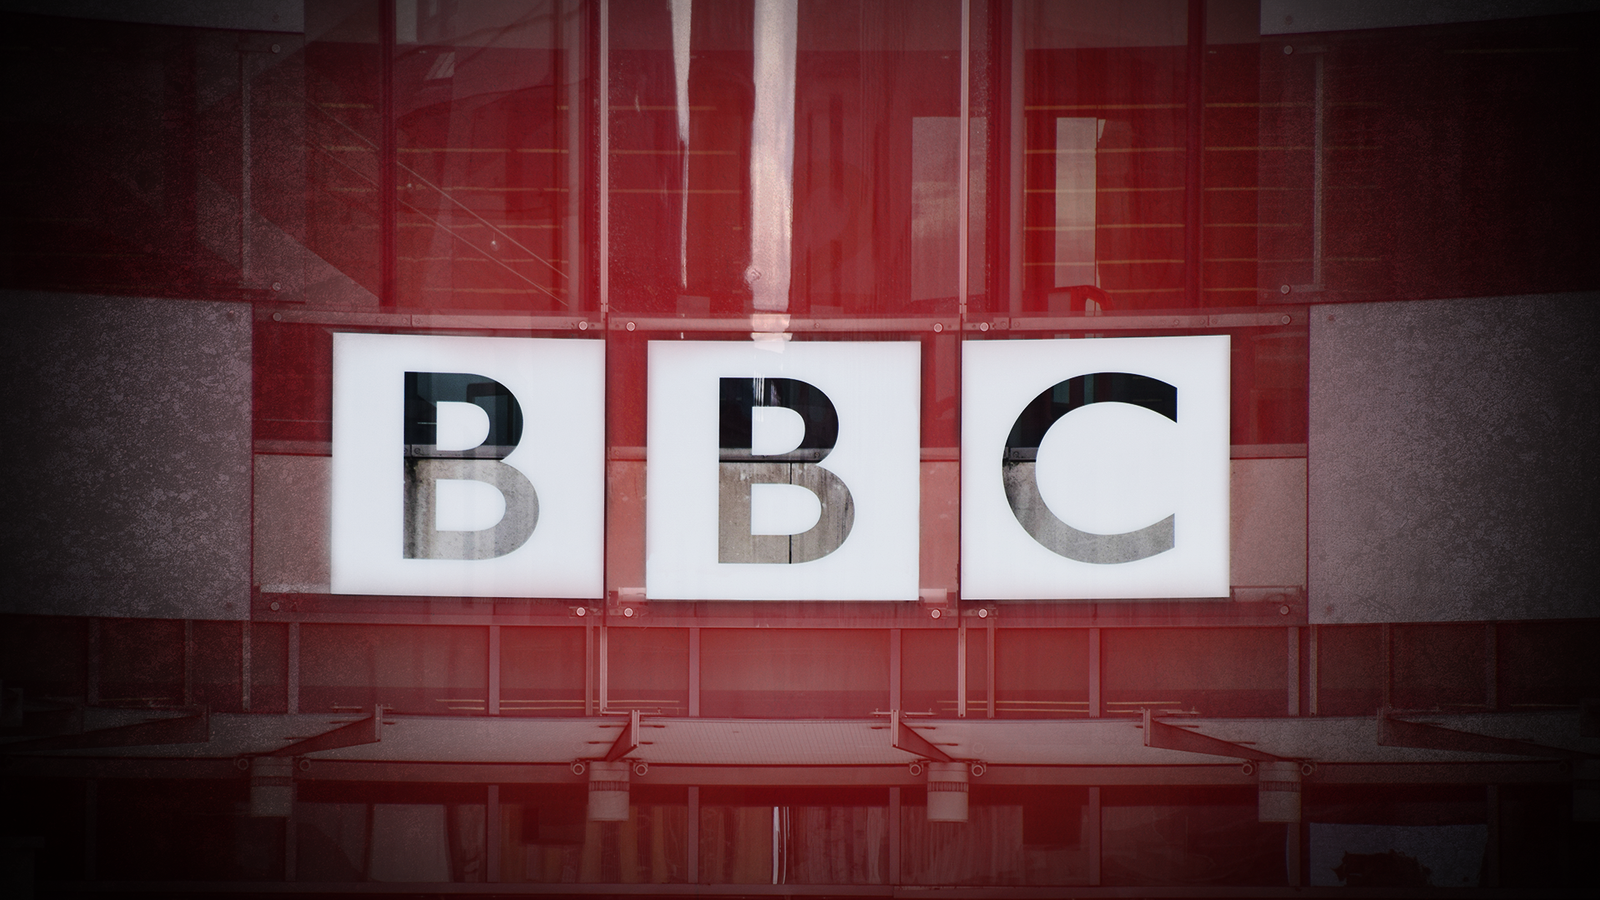 Timeline leading up to suspension of presenter accused in BBC scandal